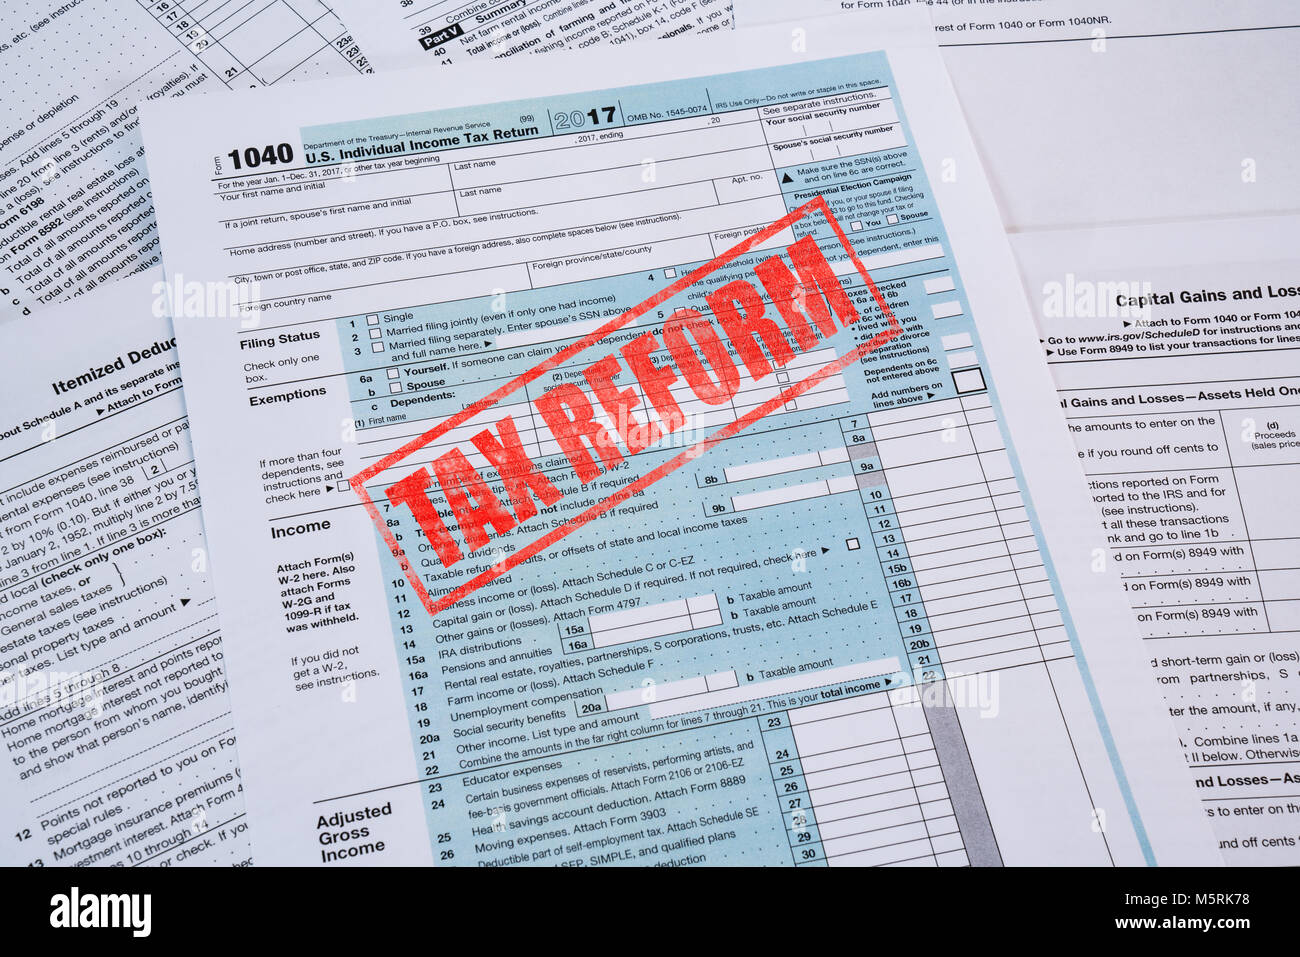 IRS 1040 Tax Form with red Tax Reform Stamp Stock Photo